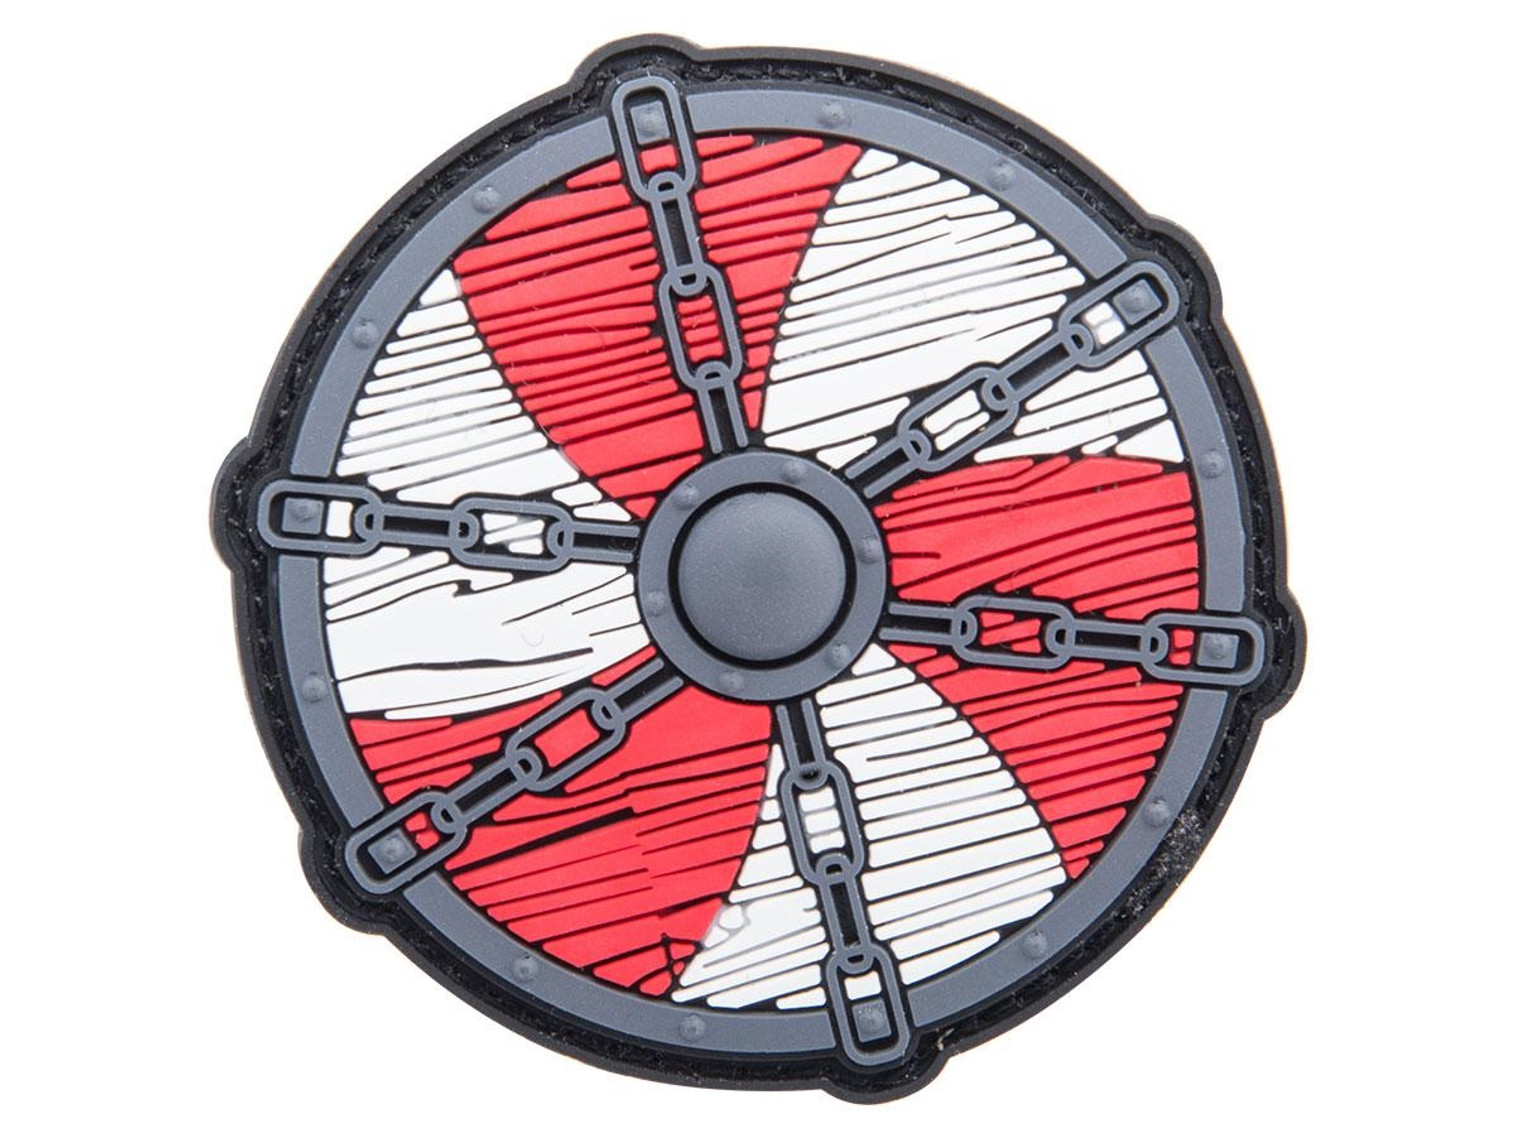 Viking Shield PVC Morale Patch (Type: Chained Spiral)